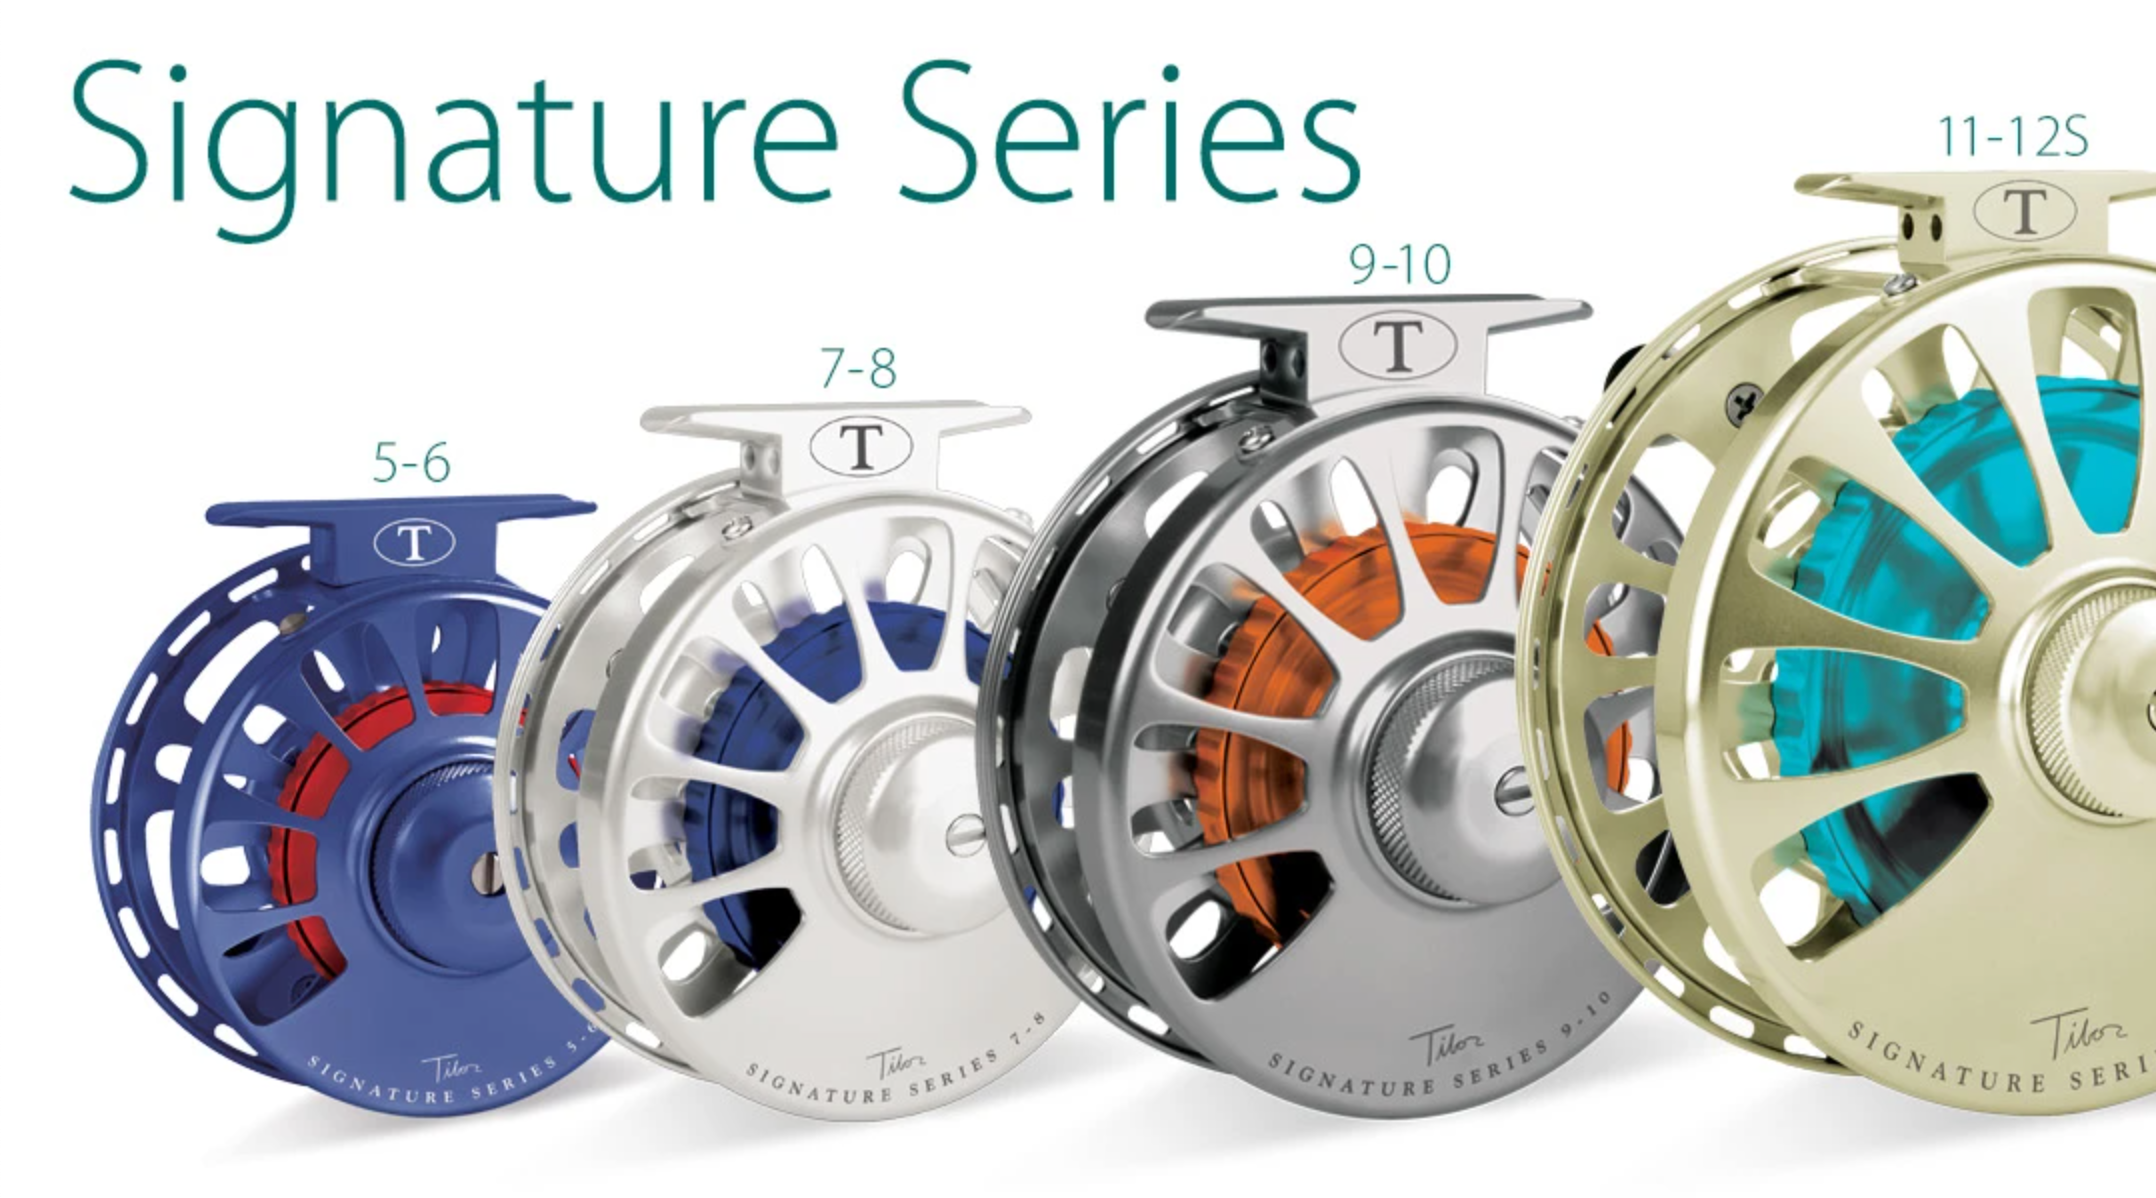 Nautilus XM Fly Reel- Medium for 4-5 weight lines- glades green